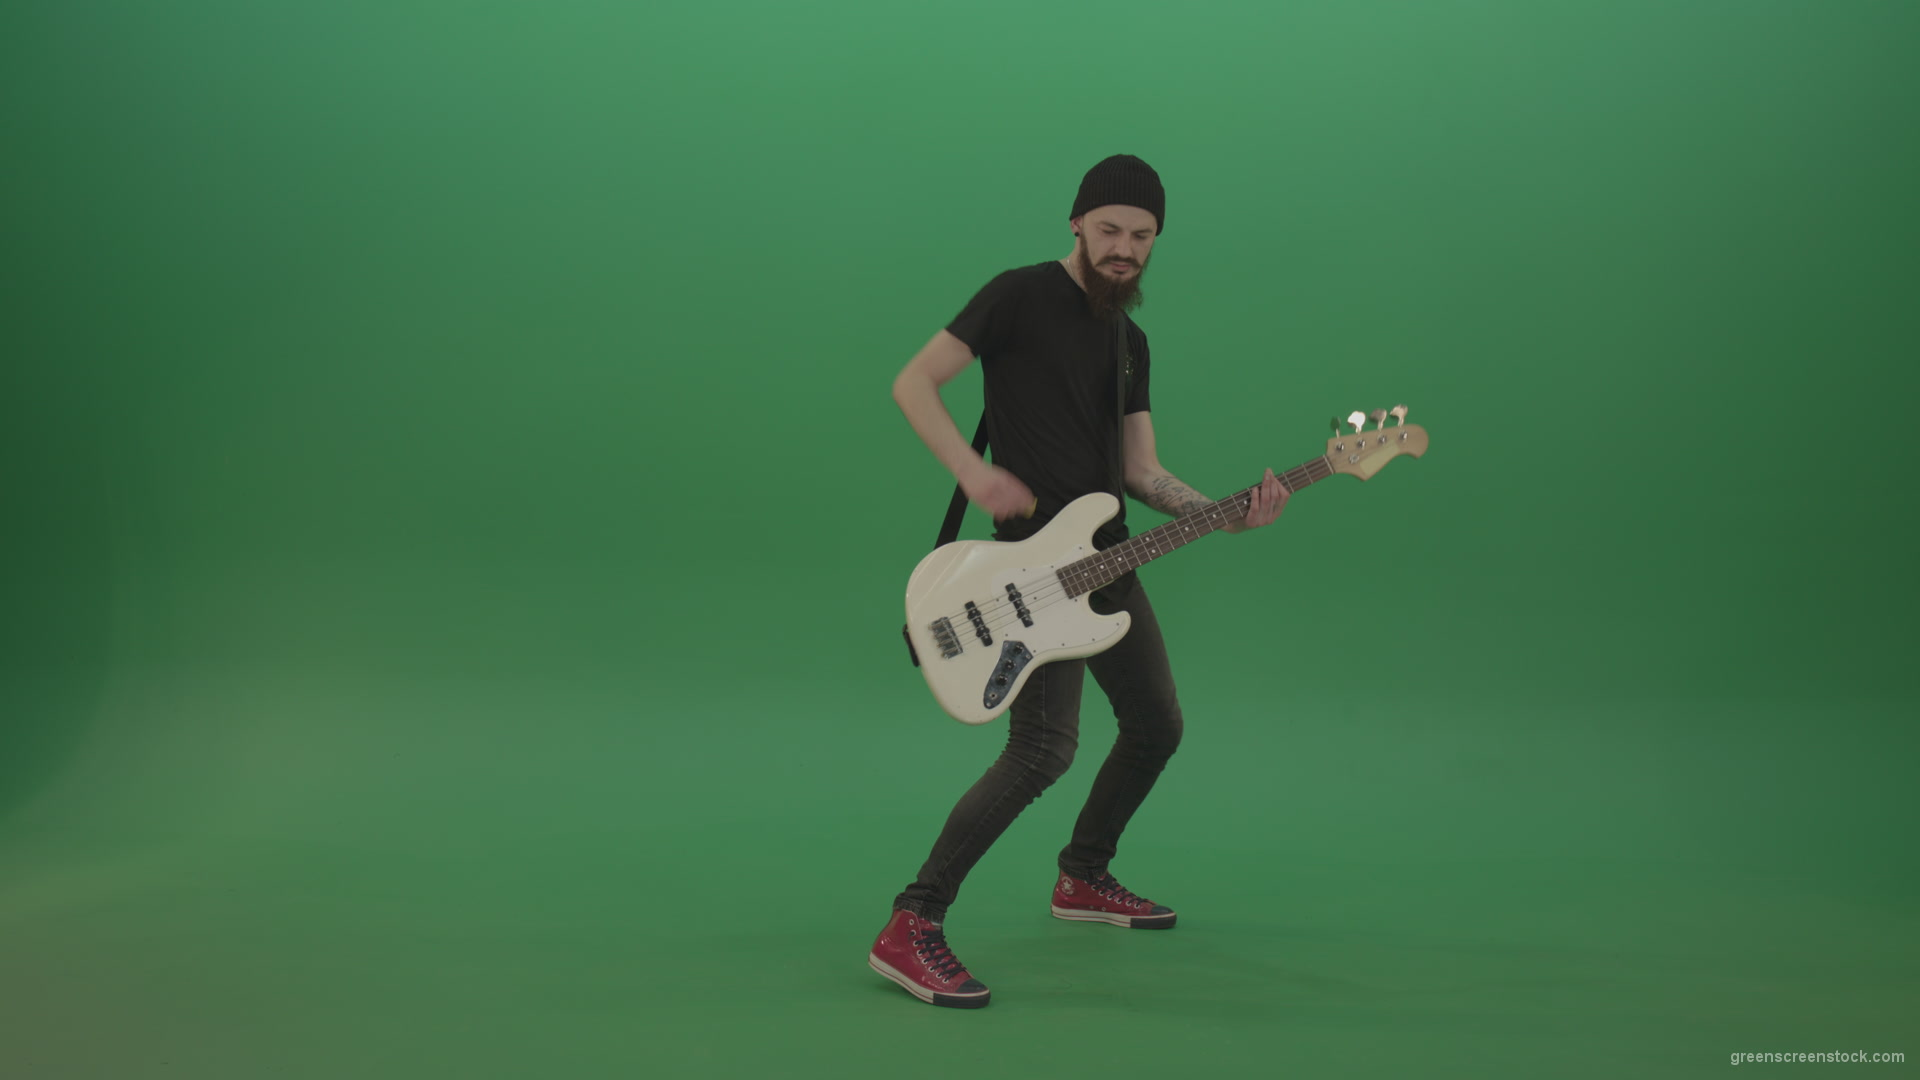 Man-play-music-instrument-bass-guitar-isolated-on-green-screen_005 Green Screen Stock